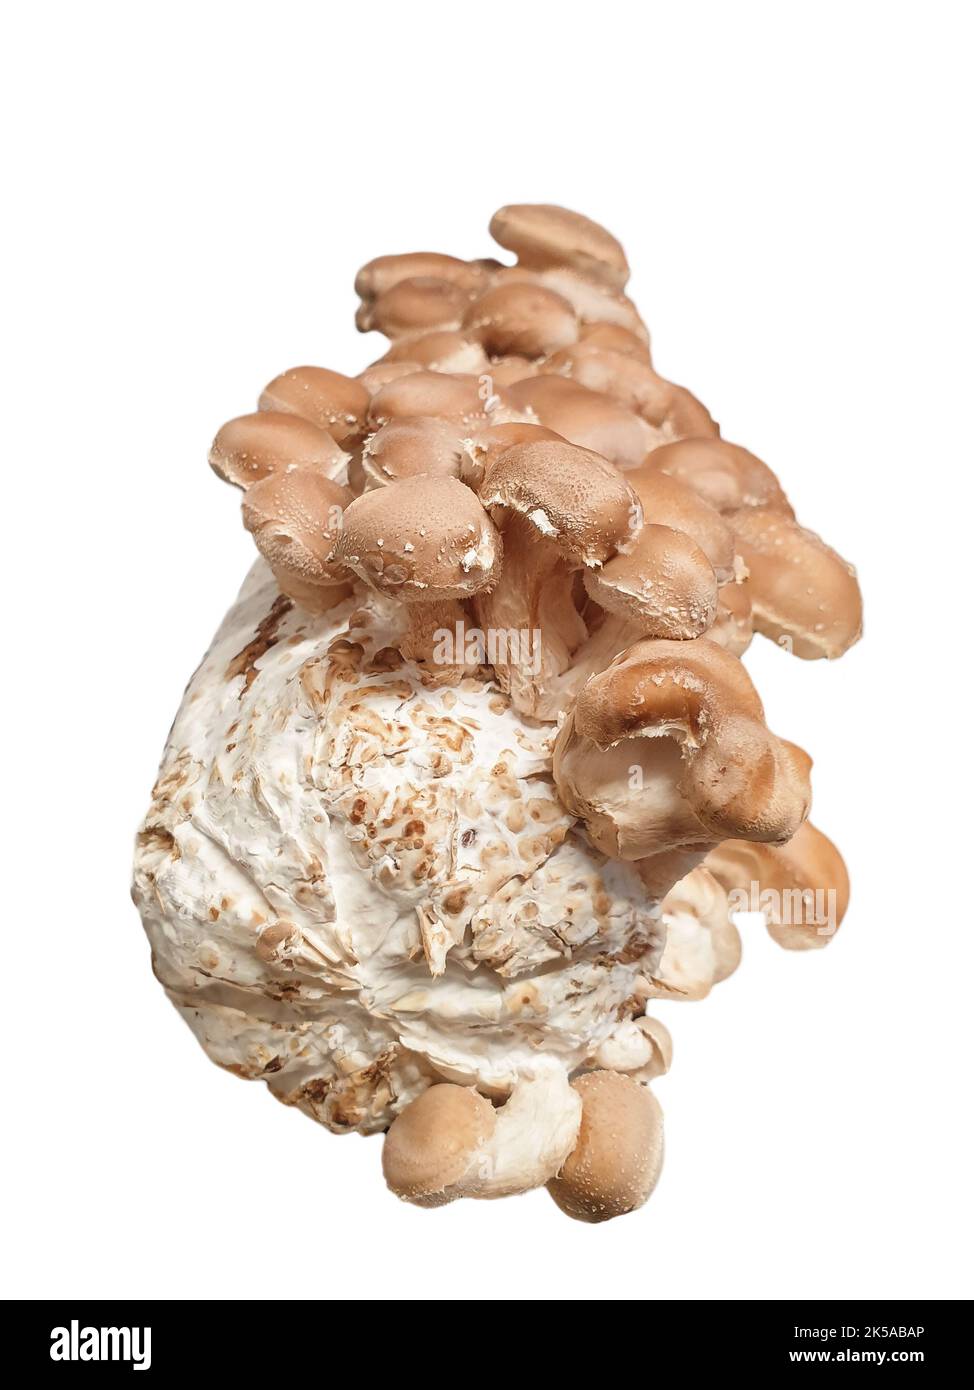 Shiitake mushrooms growing on substrate pack. Isolated on white background. Stock Photo